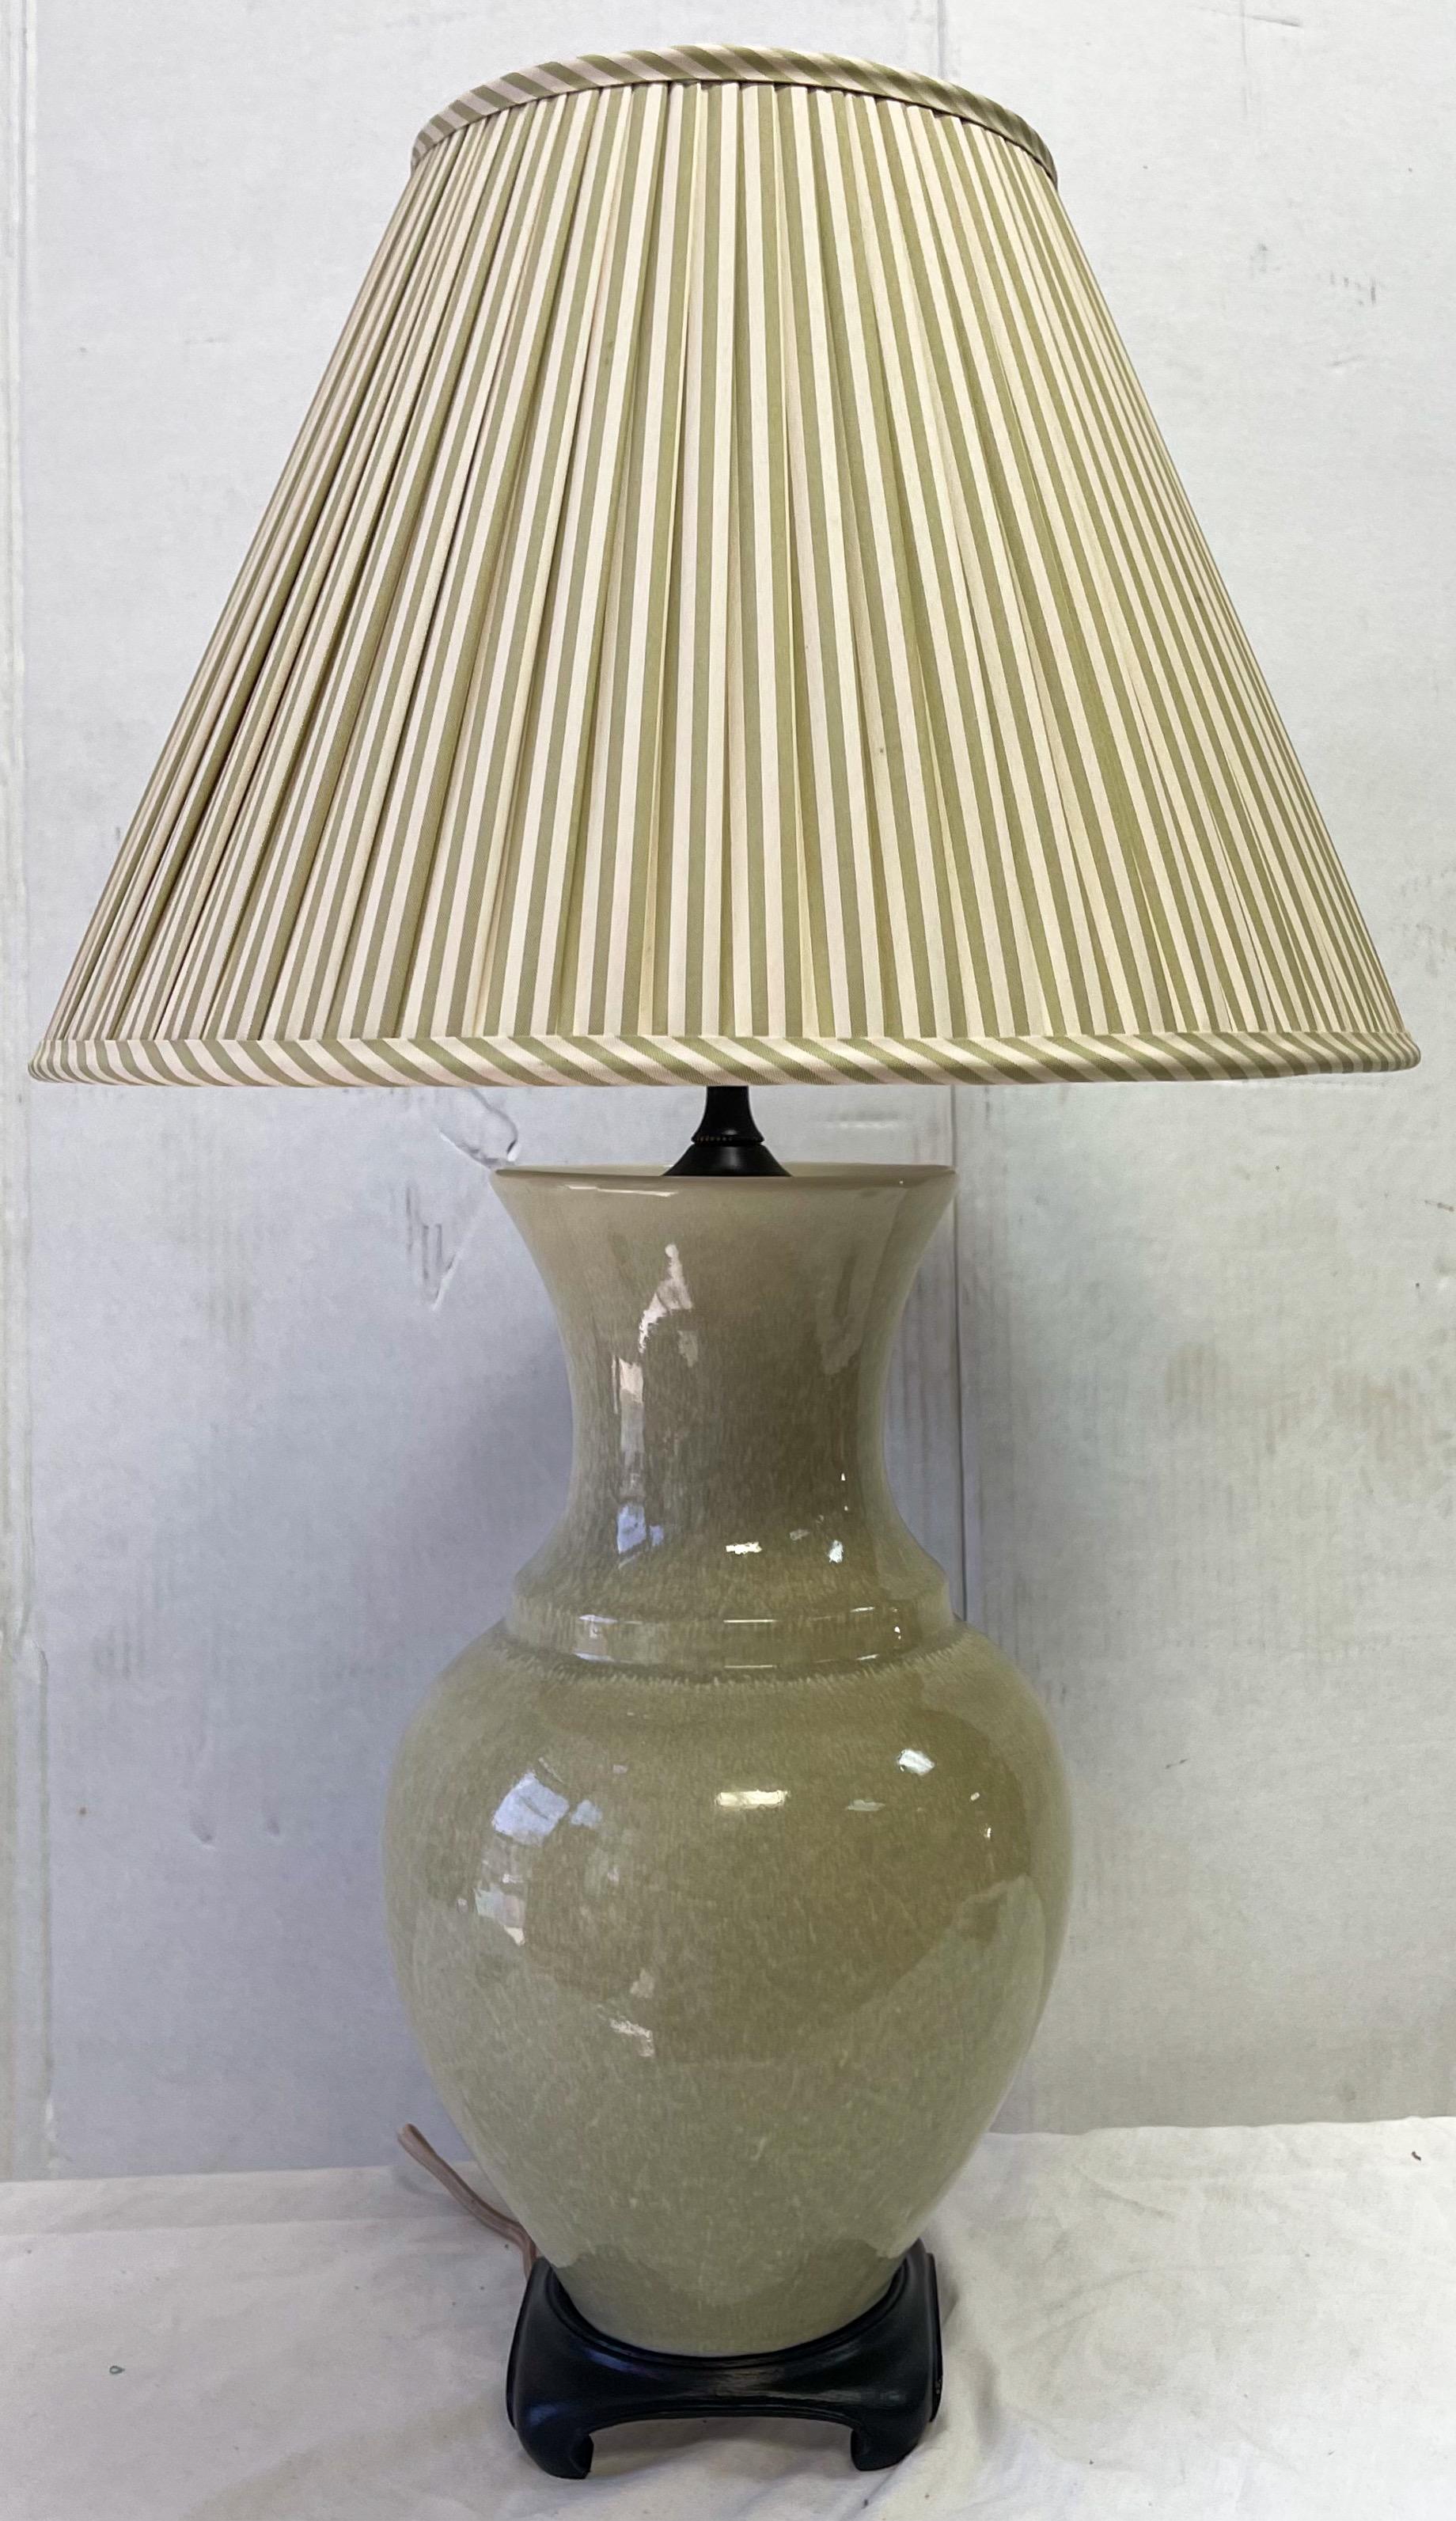 These are lovely! This is a pair of mid-century Asian style crackle finish celadon lamps attributed to Paul Hanson. The pleated shades alternate celadon with ivory and are in very good condition. They appear to be silk, but I am not absolutely